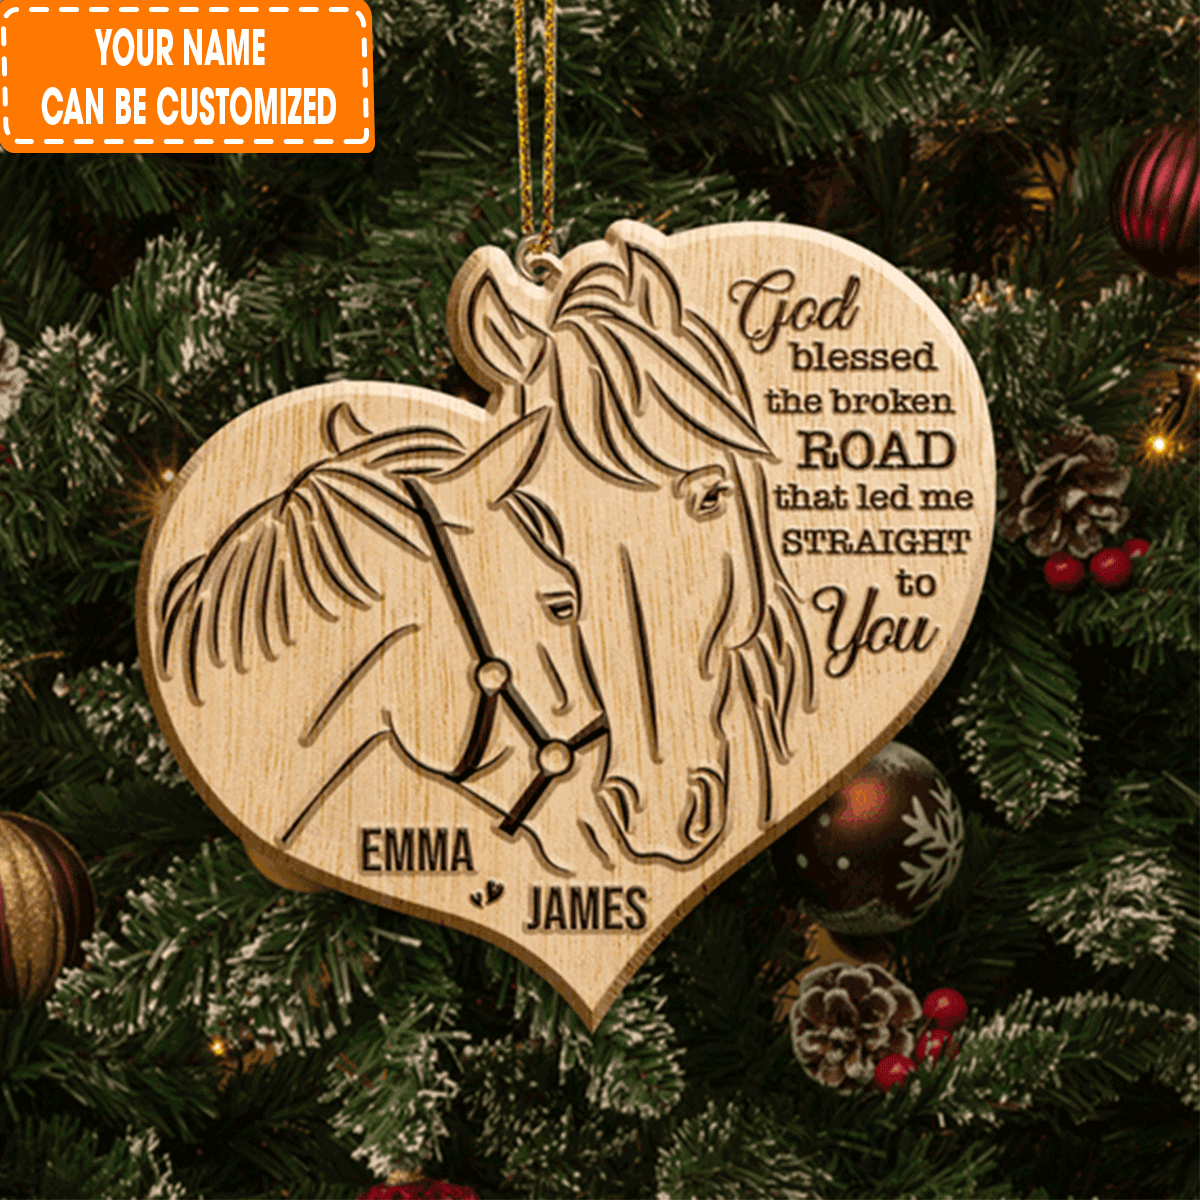 Custom Jesus Acrylic Ornament, Personalized Farm Love Horse Couple God Blessed Wood Engraved Acrylic Ornament For Christian, Holiday Decor